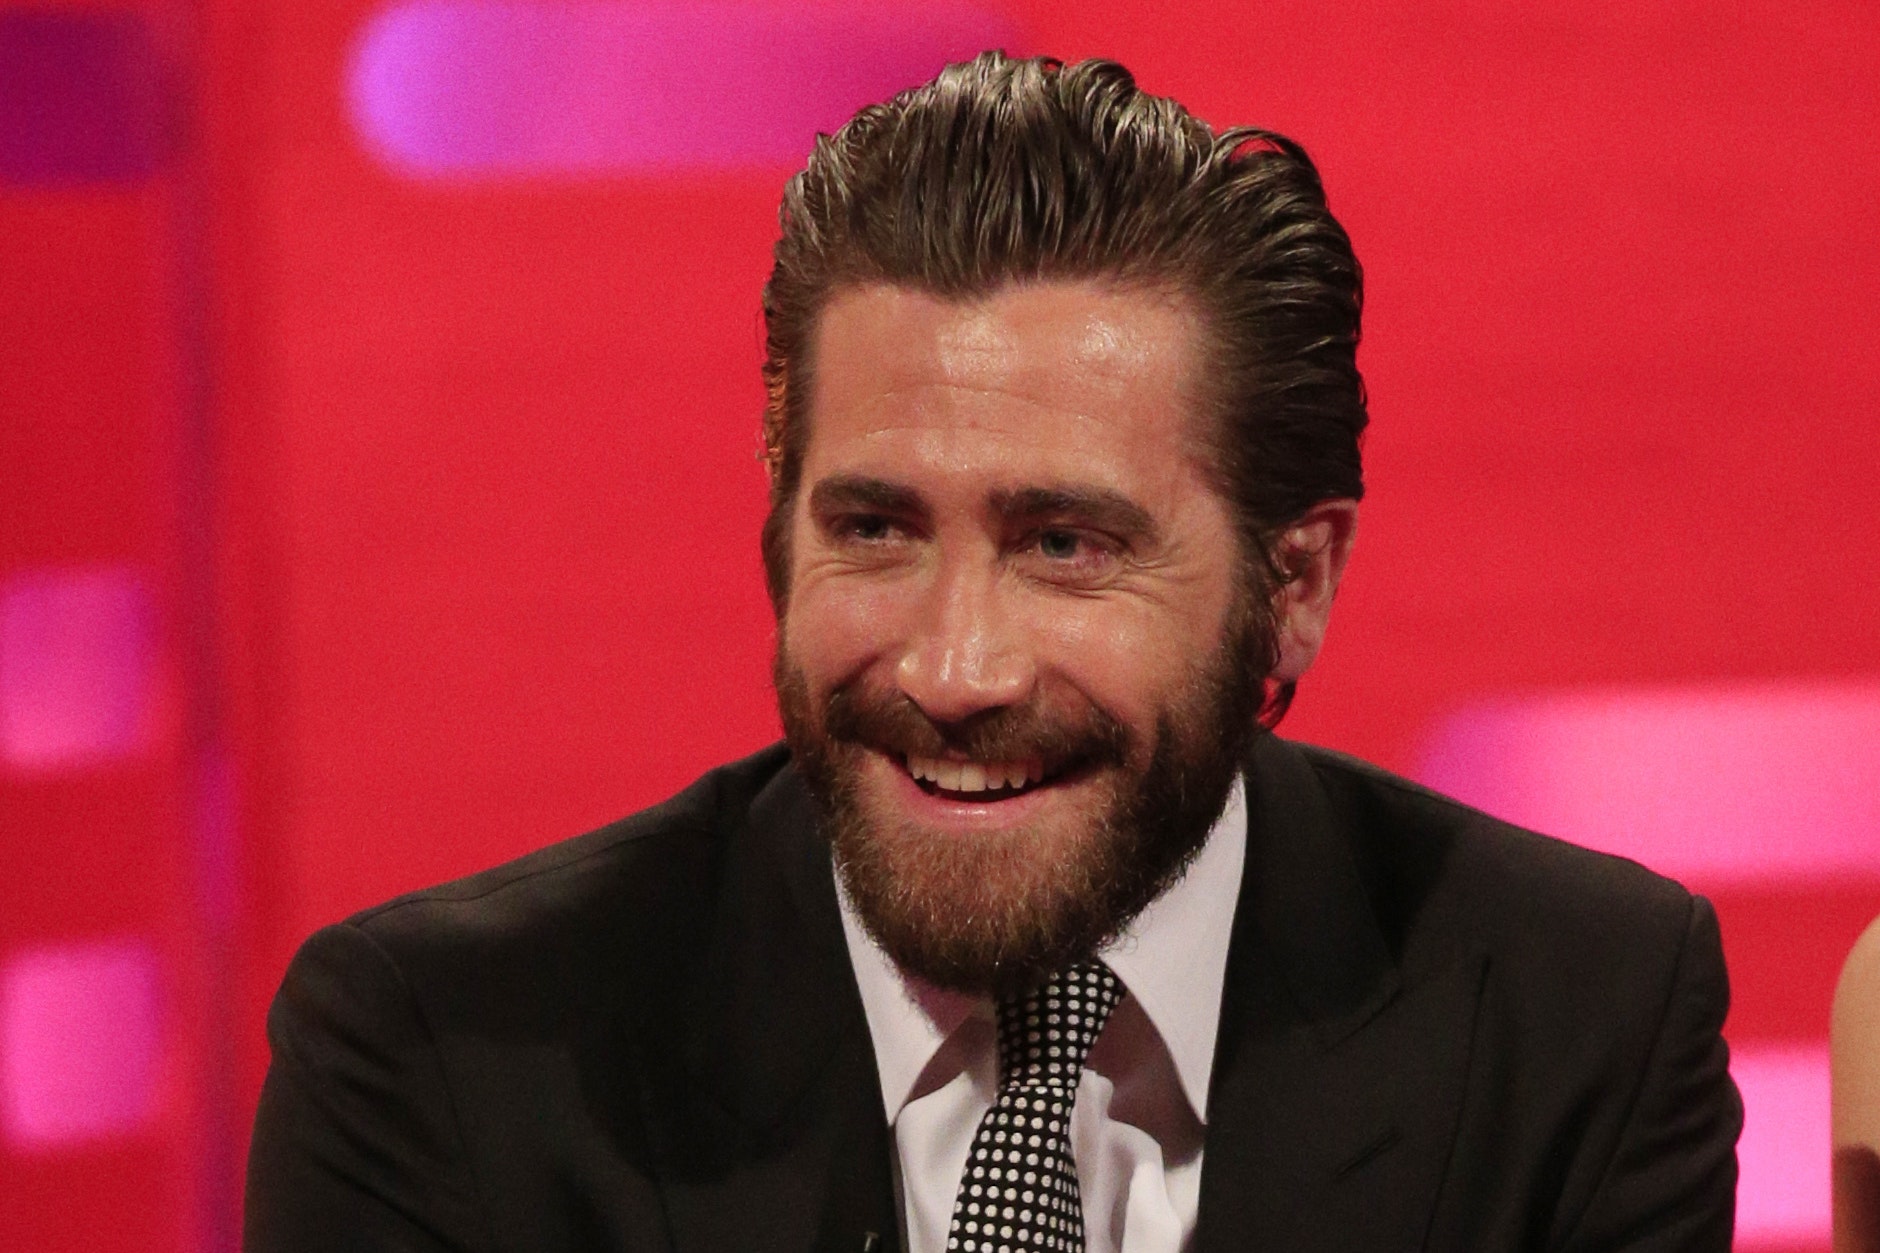 Jake Gyllenhaal joins Instagram and confirms role in upcoming Spider-Man film